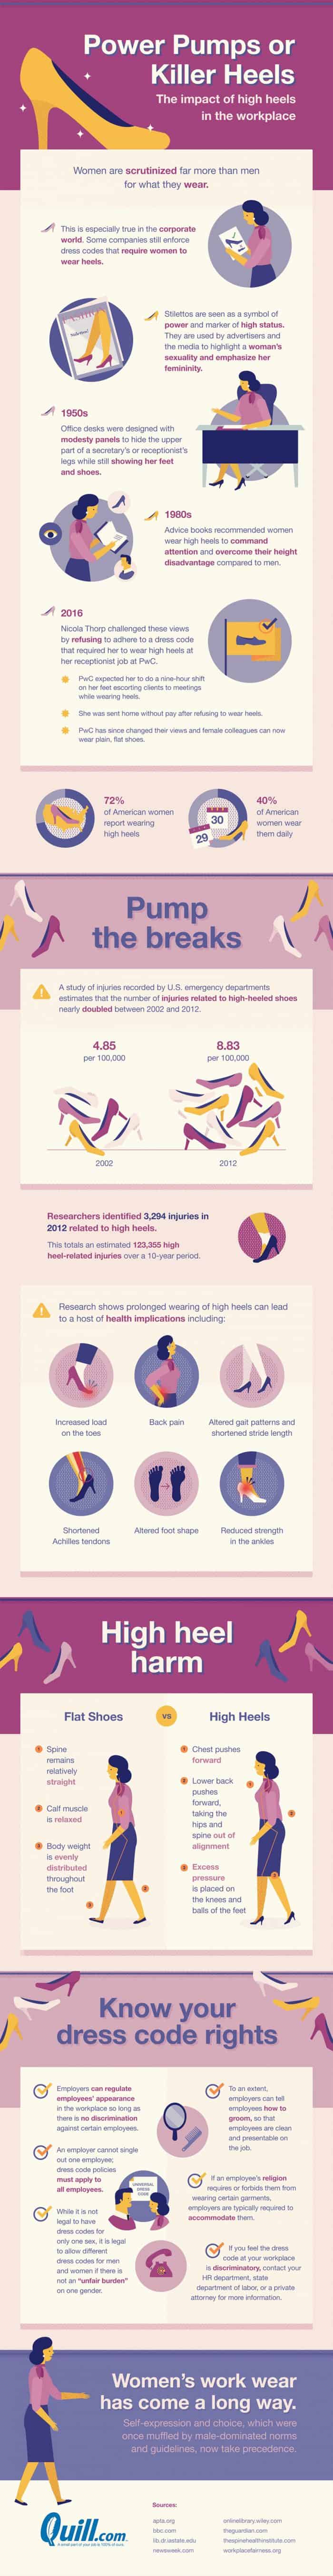 impact of wearing high heels at work, statistics, history and health effects infographic